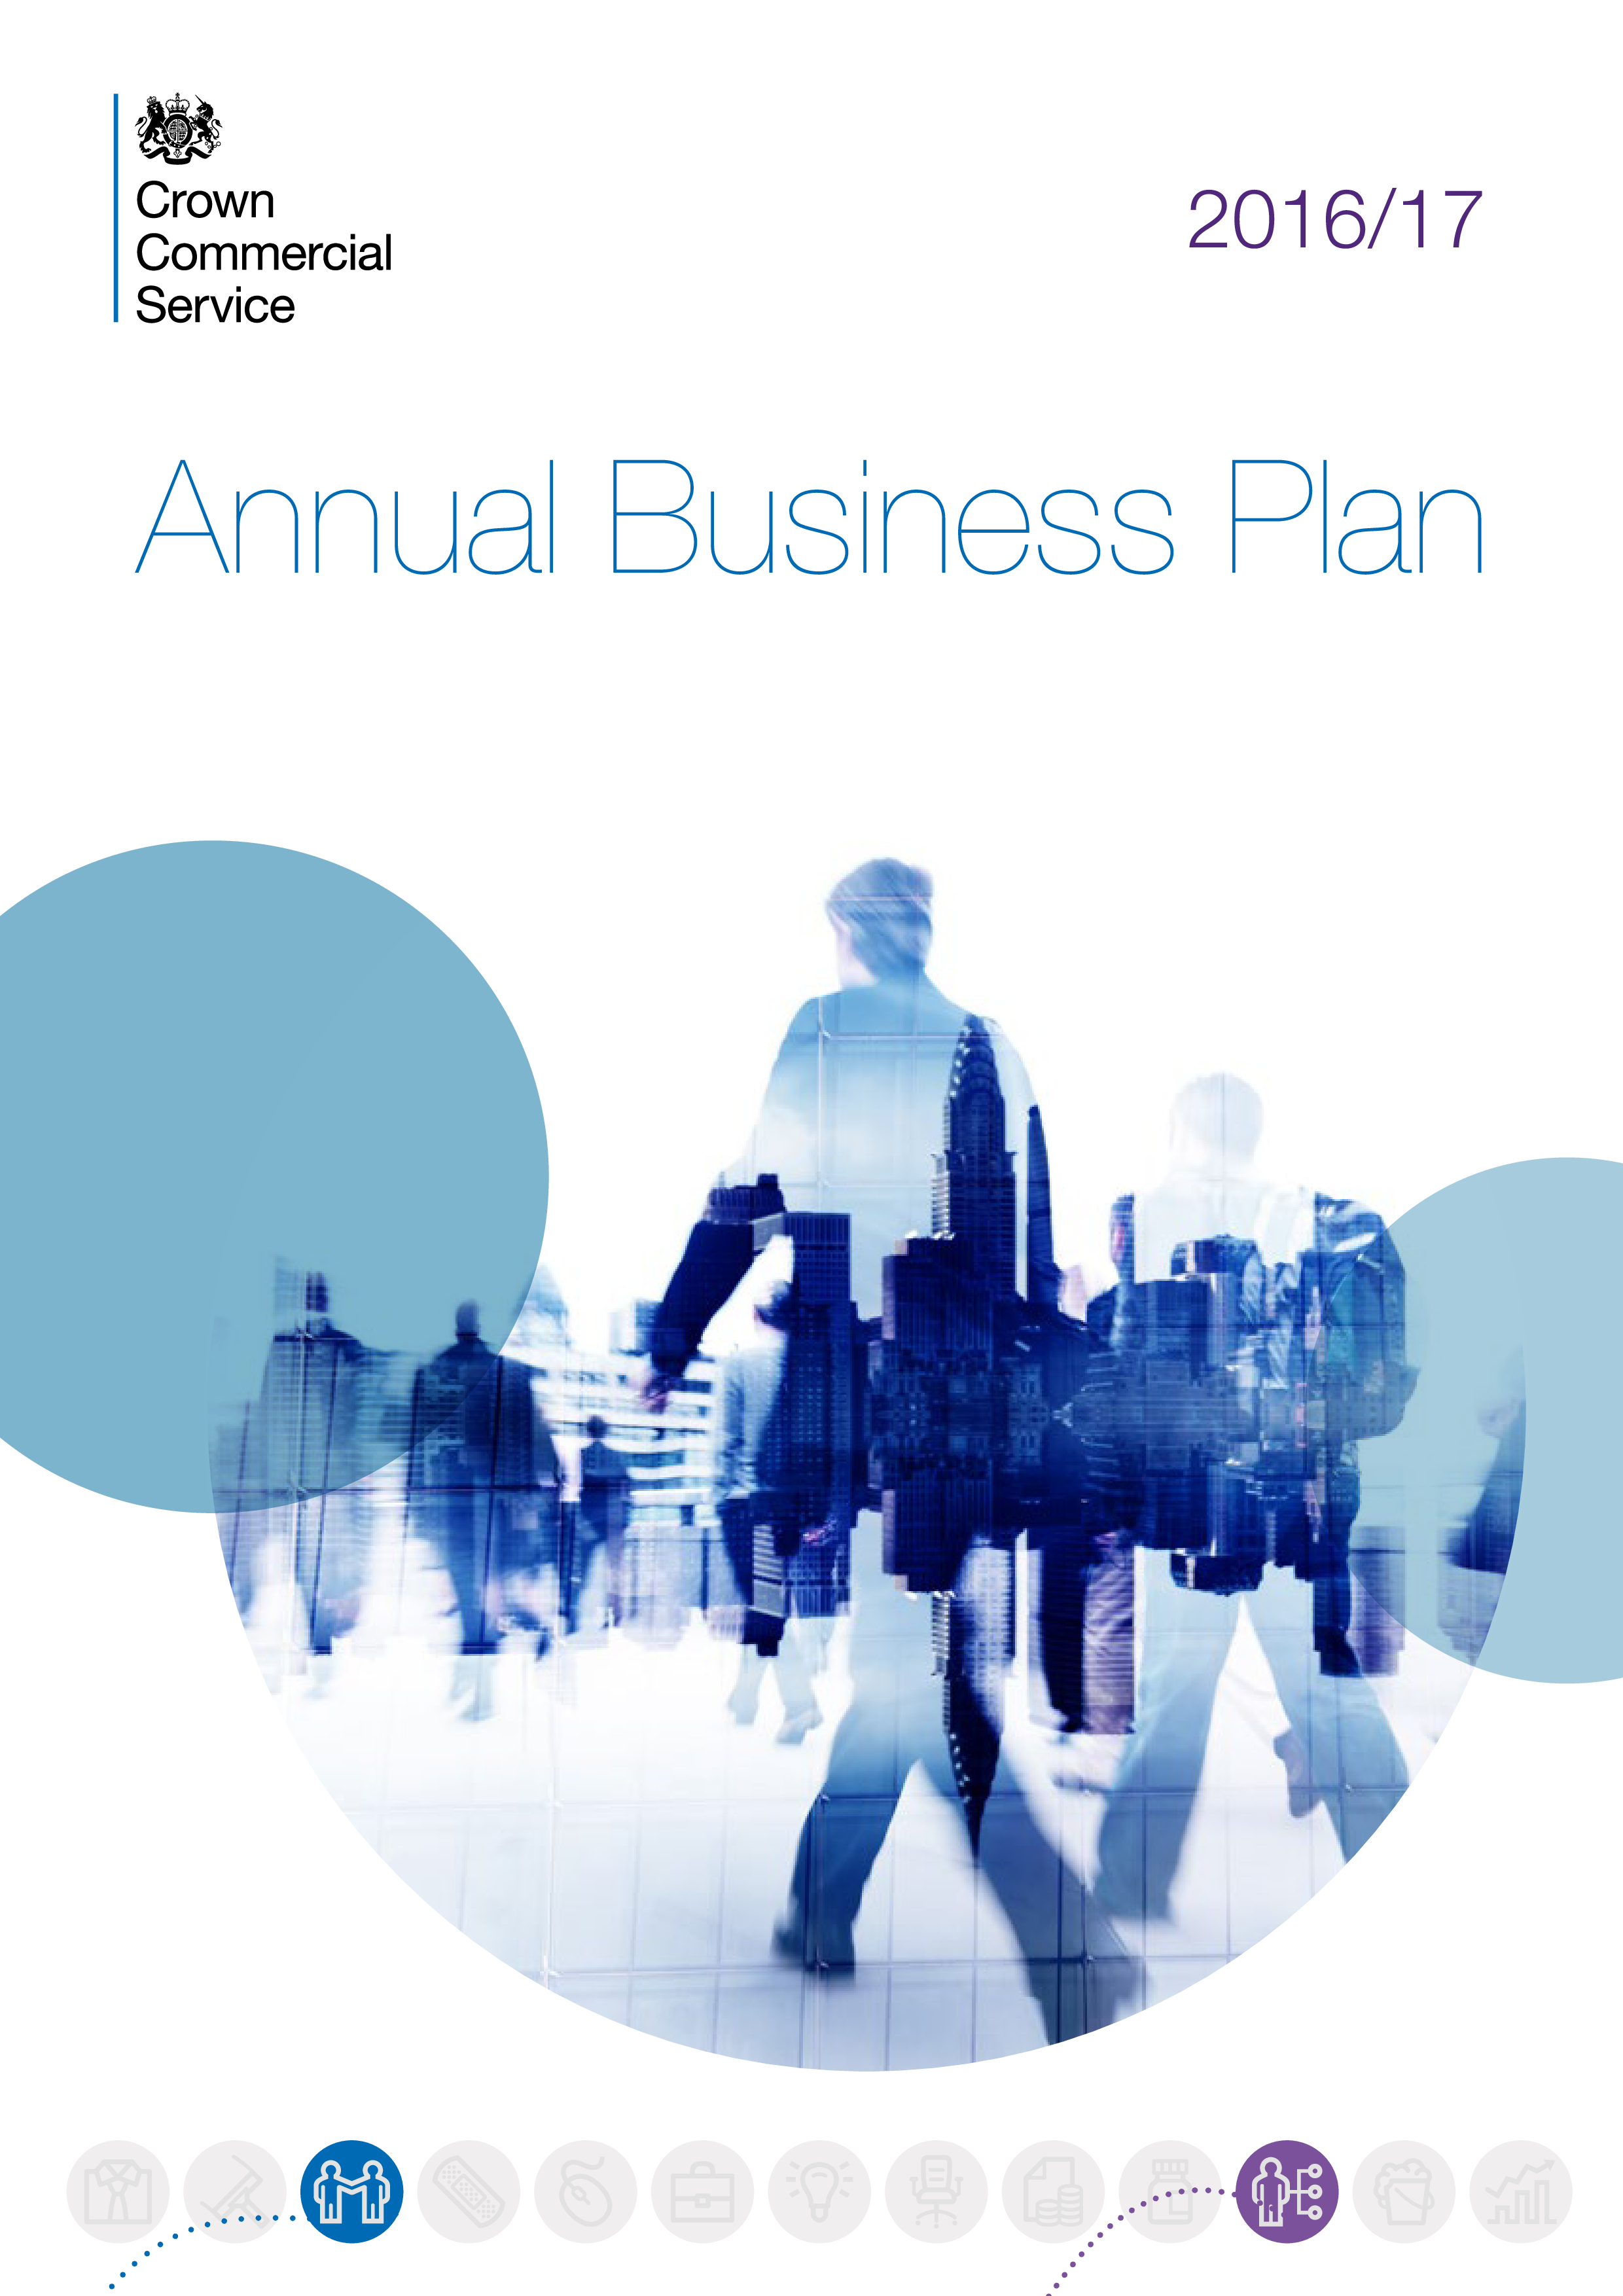 Basic Annual Business Plan Templates at